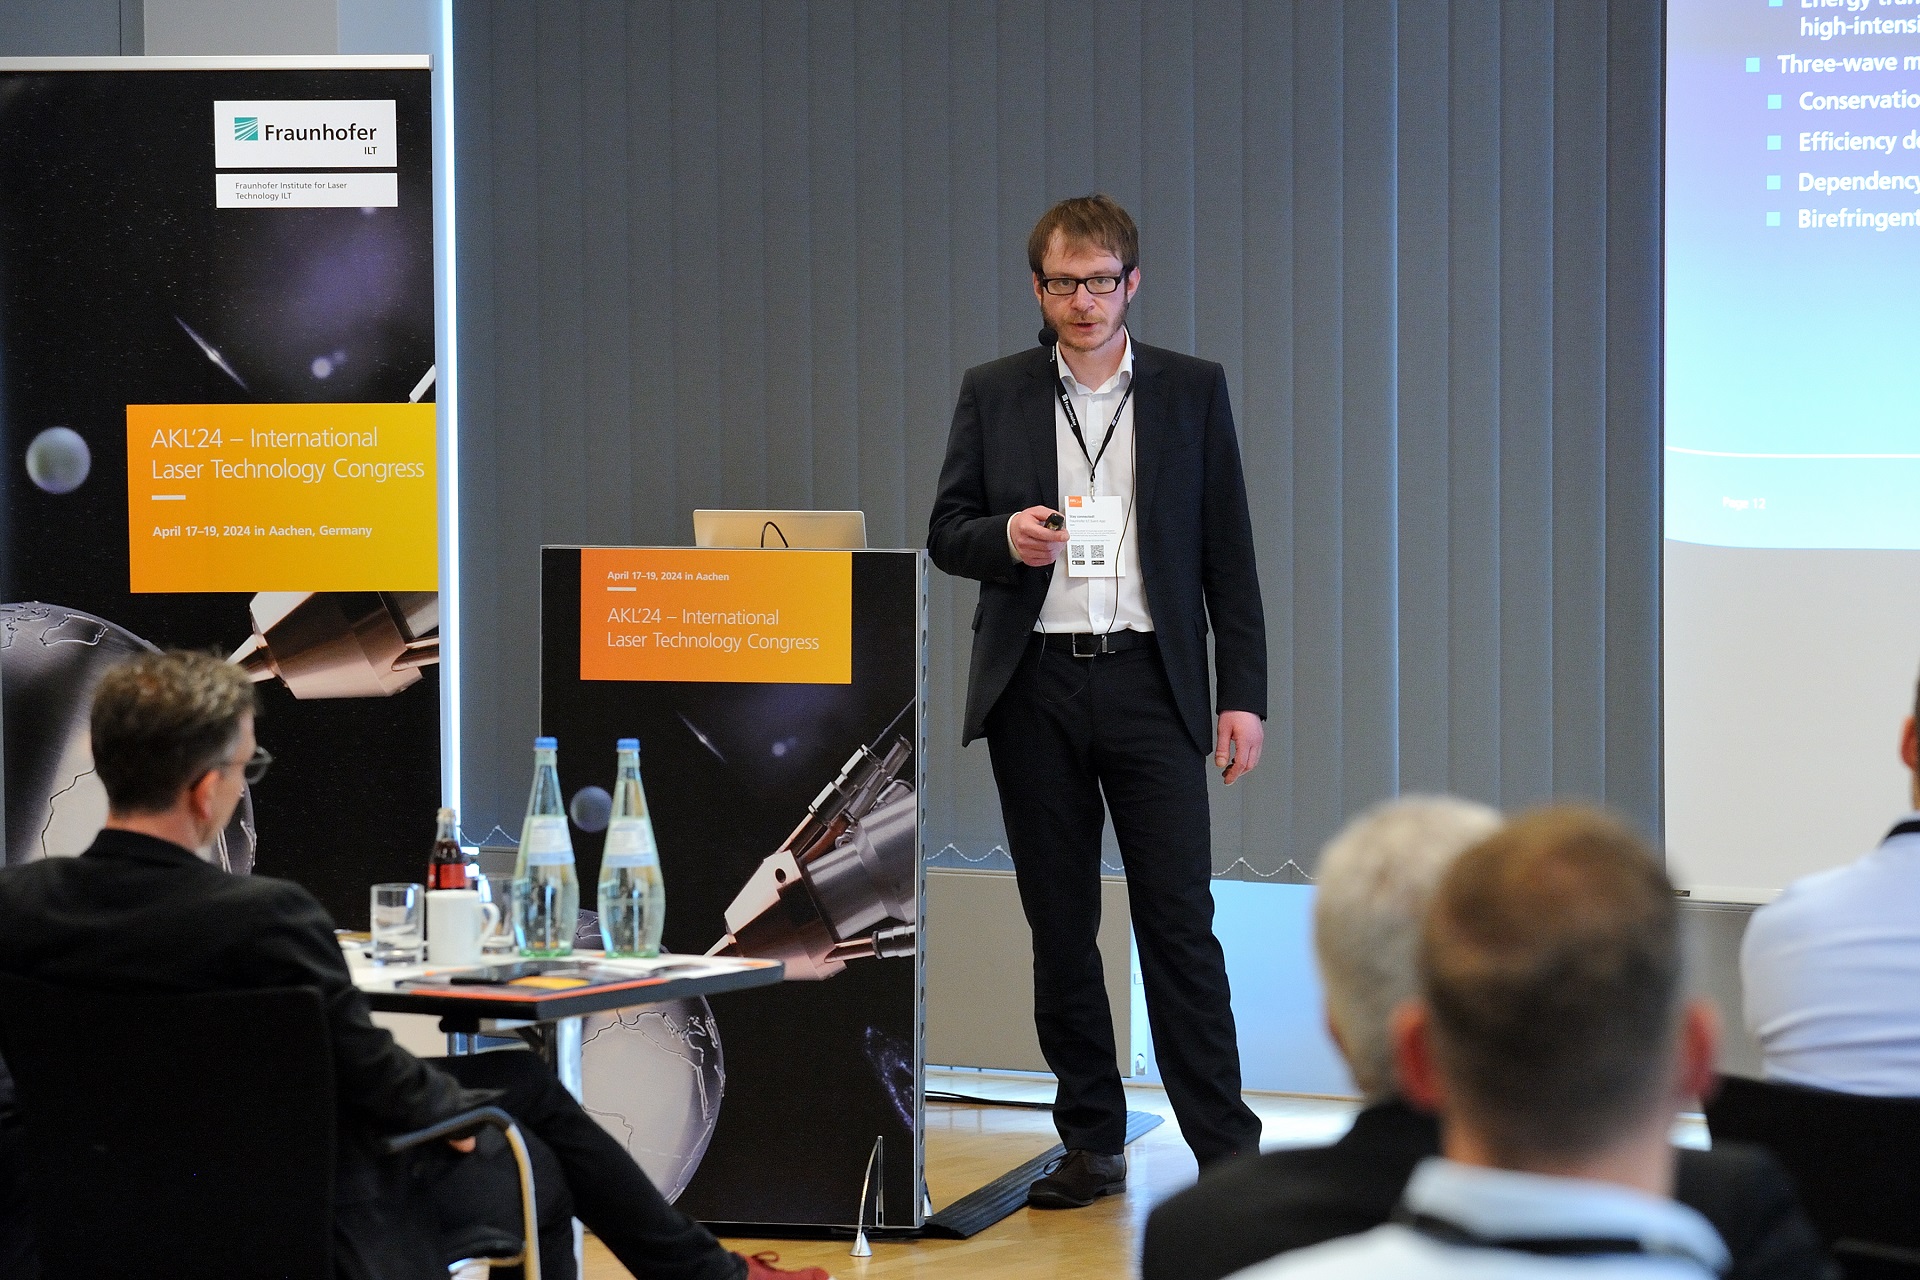 Fabian Geus from the NLO and Tunable Lasers group at Fraunhofer ILT.